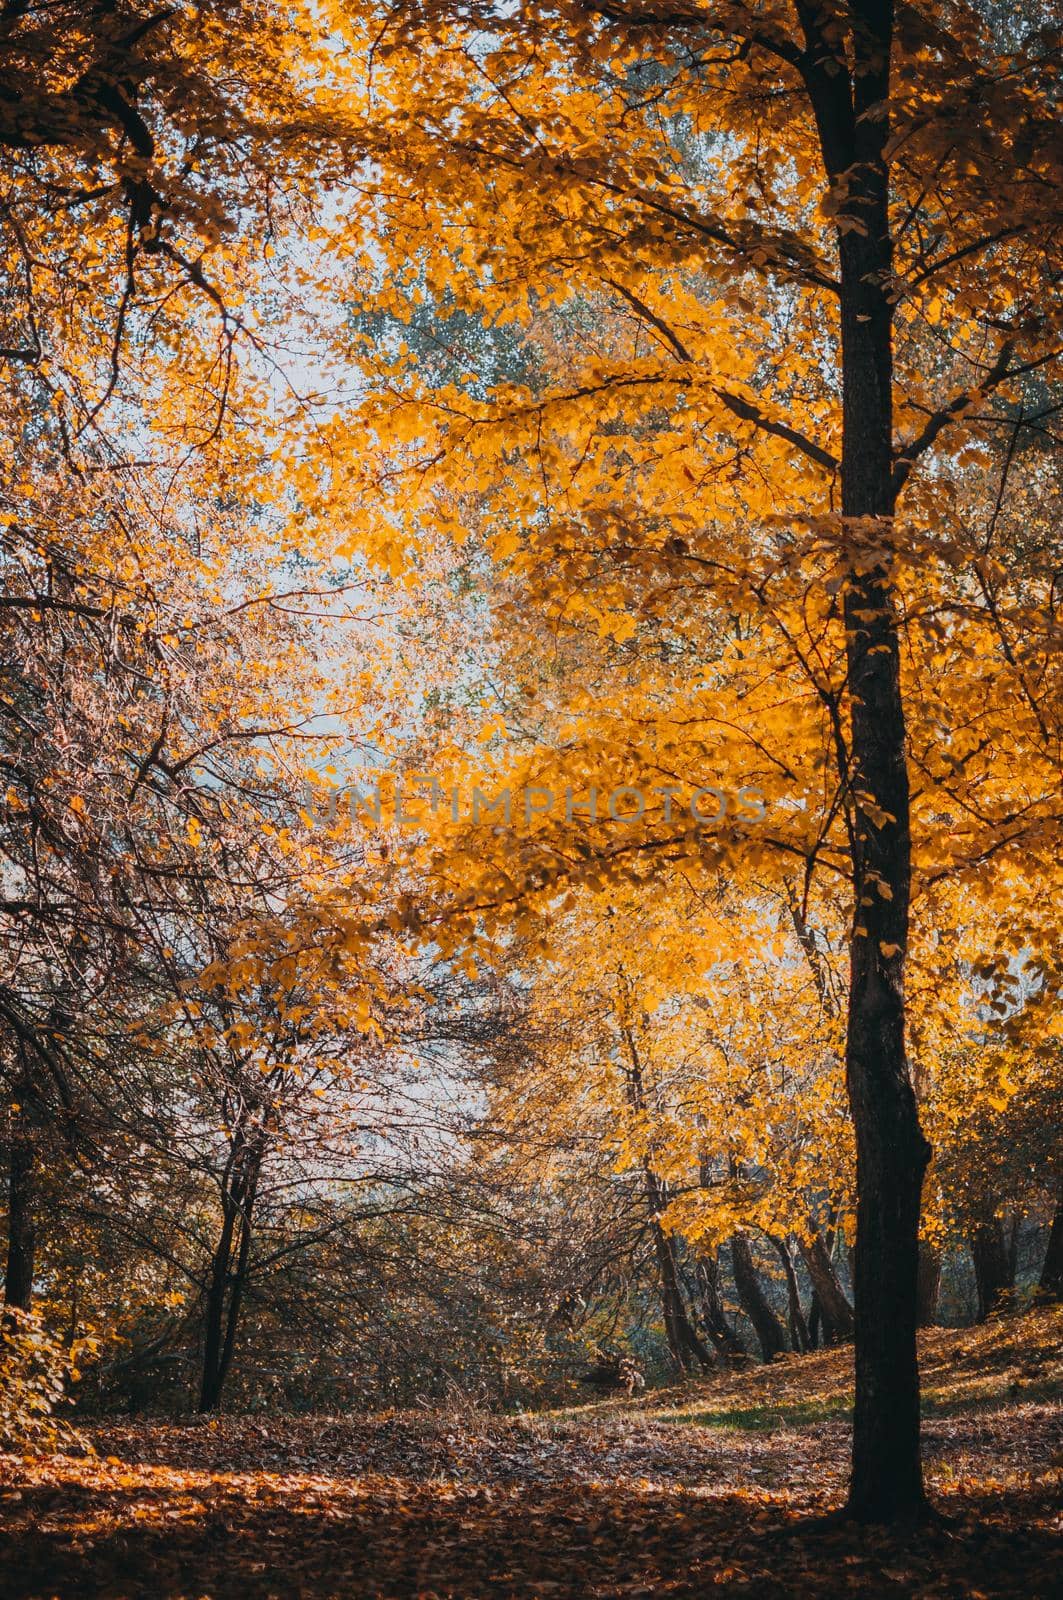 Autumn forest landscape with colorful trees in the park. Golden trees, the ground is strewn with leaves, gloomy sky. The concept of the onset of autumn.